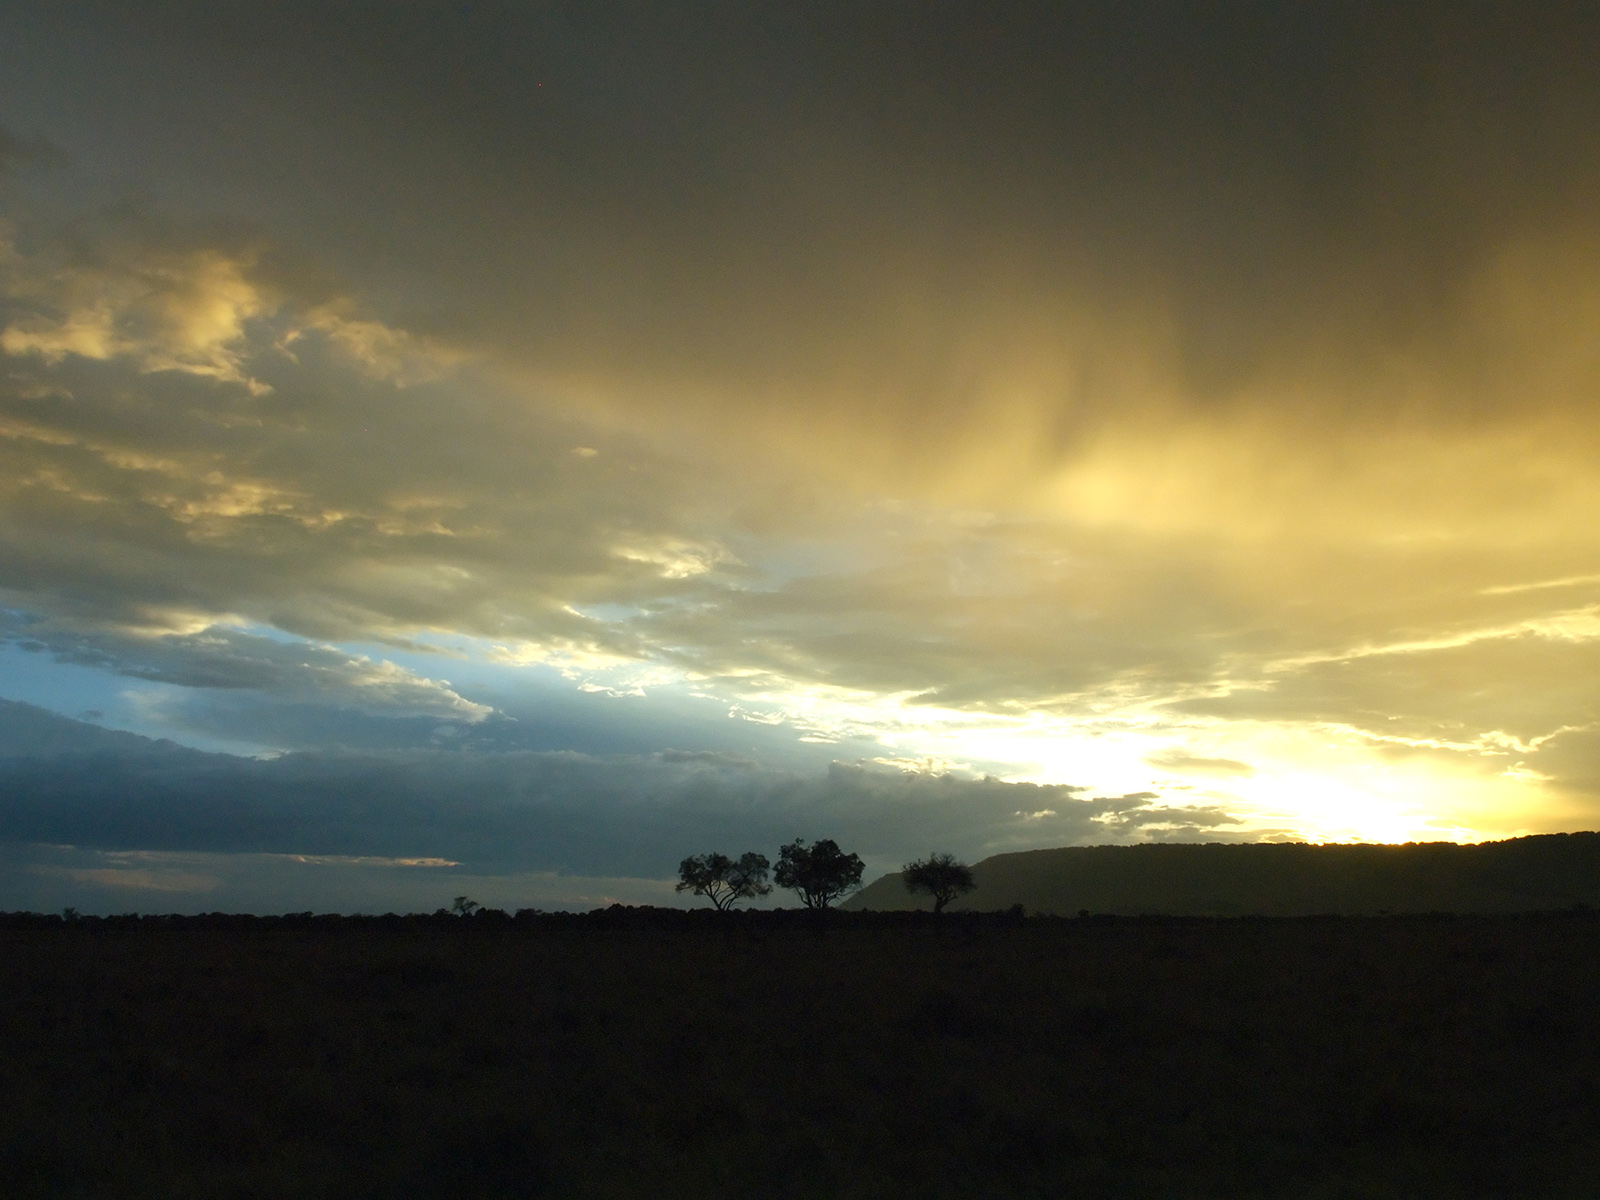 glorious sunset on the plains of the Masai Mara in Kenya